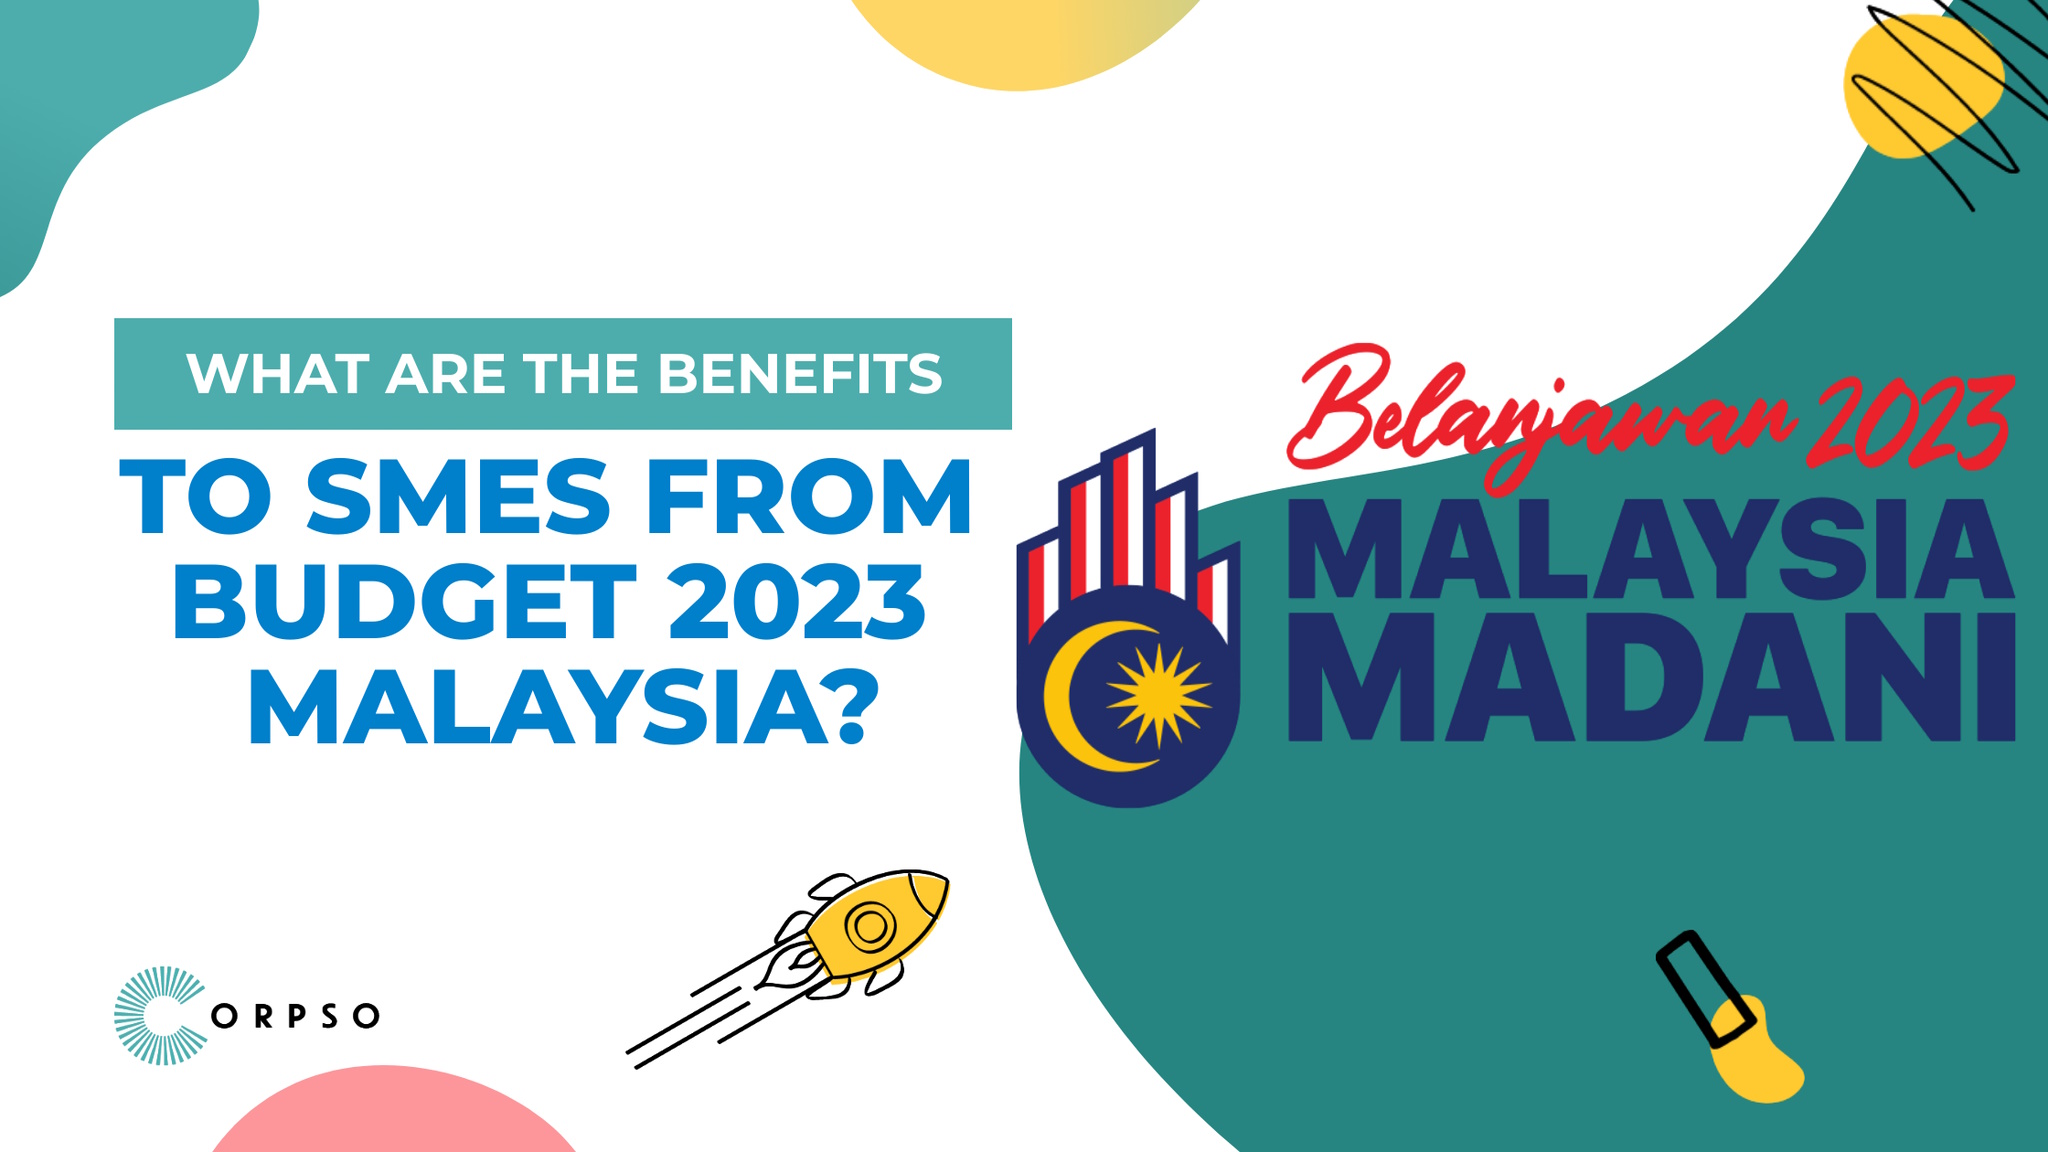 What are the benefits to SMEs from Budget 2023 Malaysia?